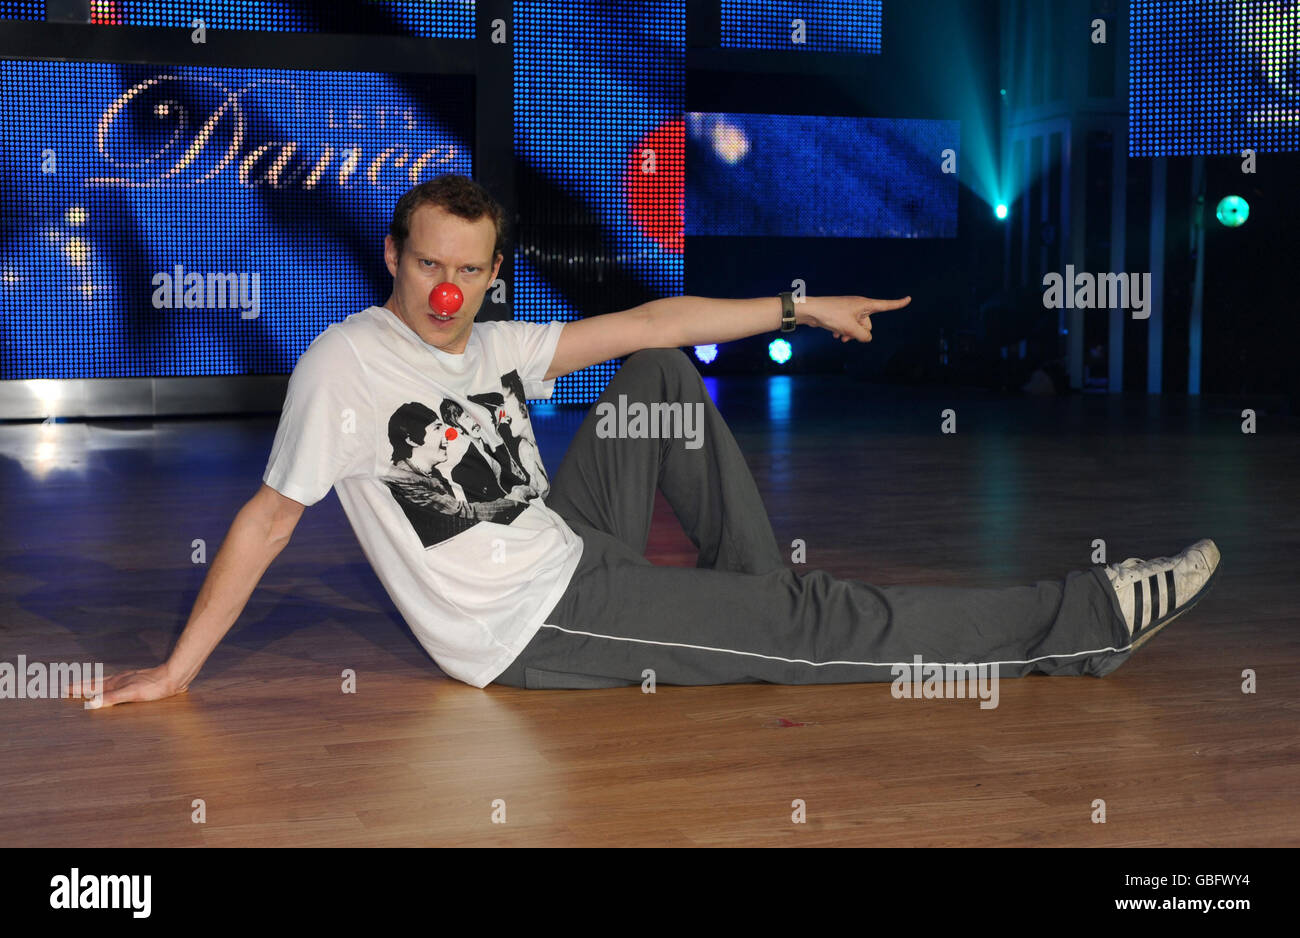 Robert Webb rehearses ahead of his performance in the final of BBC1's Let's Dance for Comic Relief (TX: Saturday March 14 @ 1915) at Ealing Studios in west London. Stock Photo